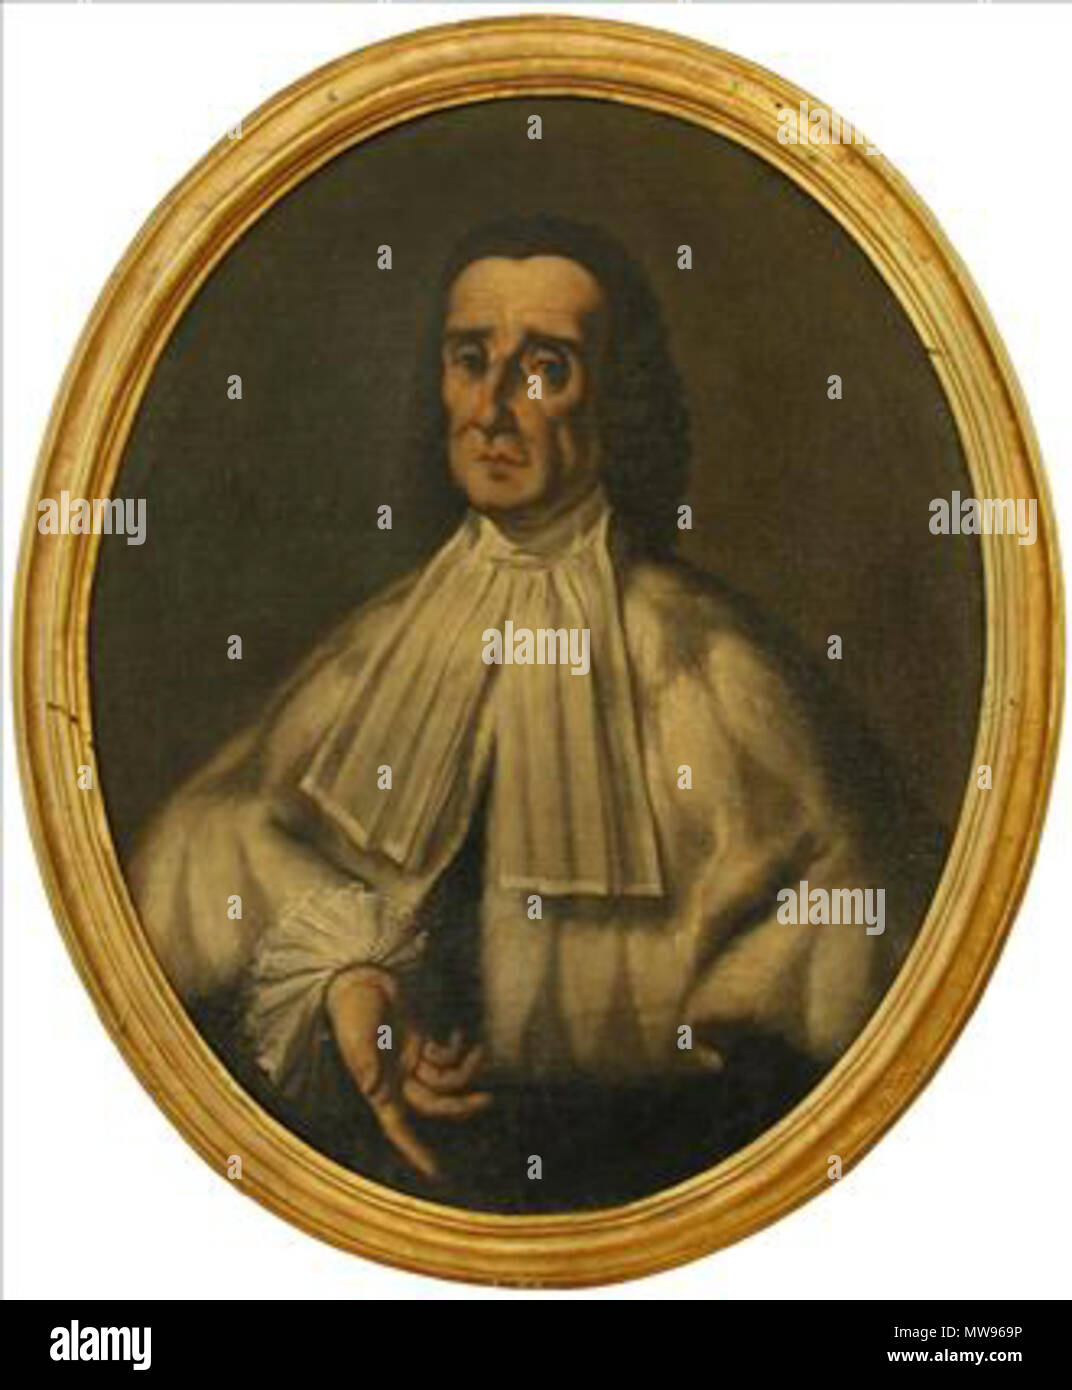 . English: Jacopo Bartolomeo Beccari (25 July 1682 - 18 January 1766 ), an Italian chemist, one of the leading scientists in Bologna in the first half of the eighteenth century. He is mainly known as the discoverer of the gluten in wheat flour. before 1767. University of Bologna 73 Bartolomeo Beccari Stock Photo